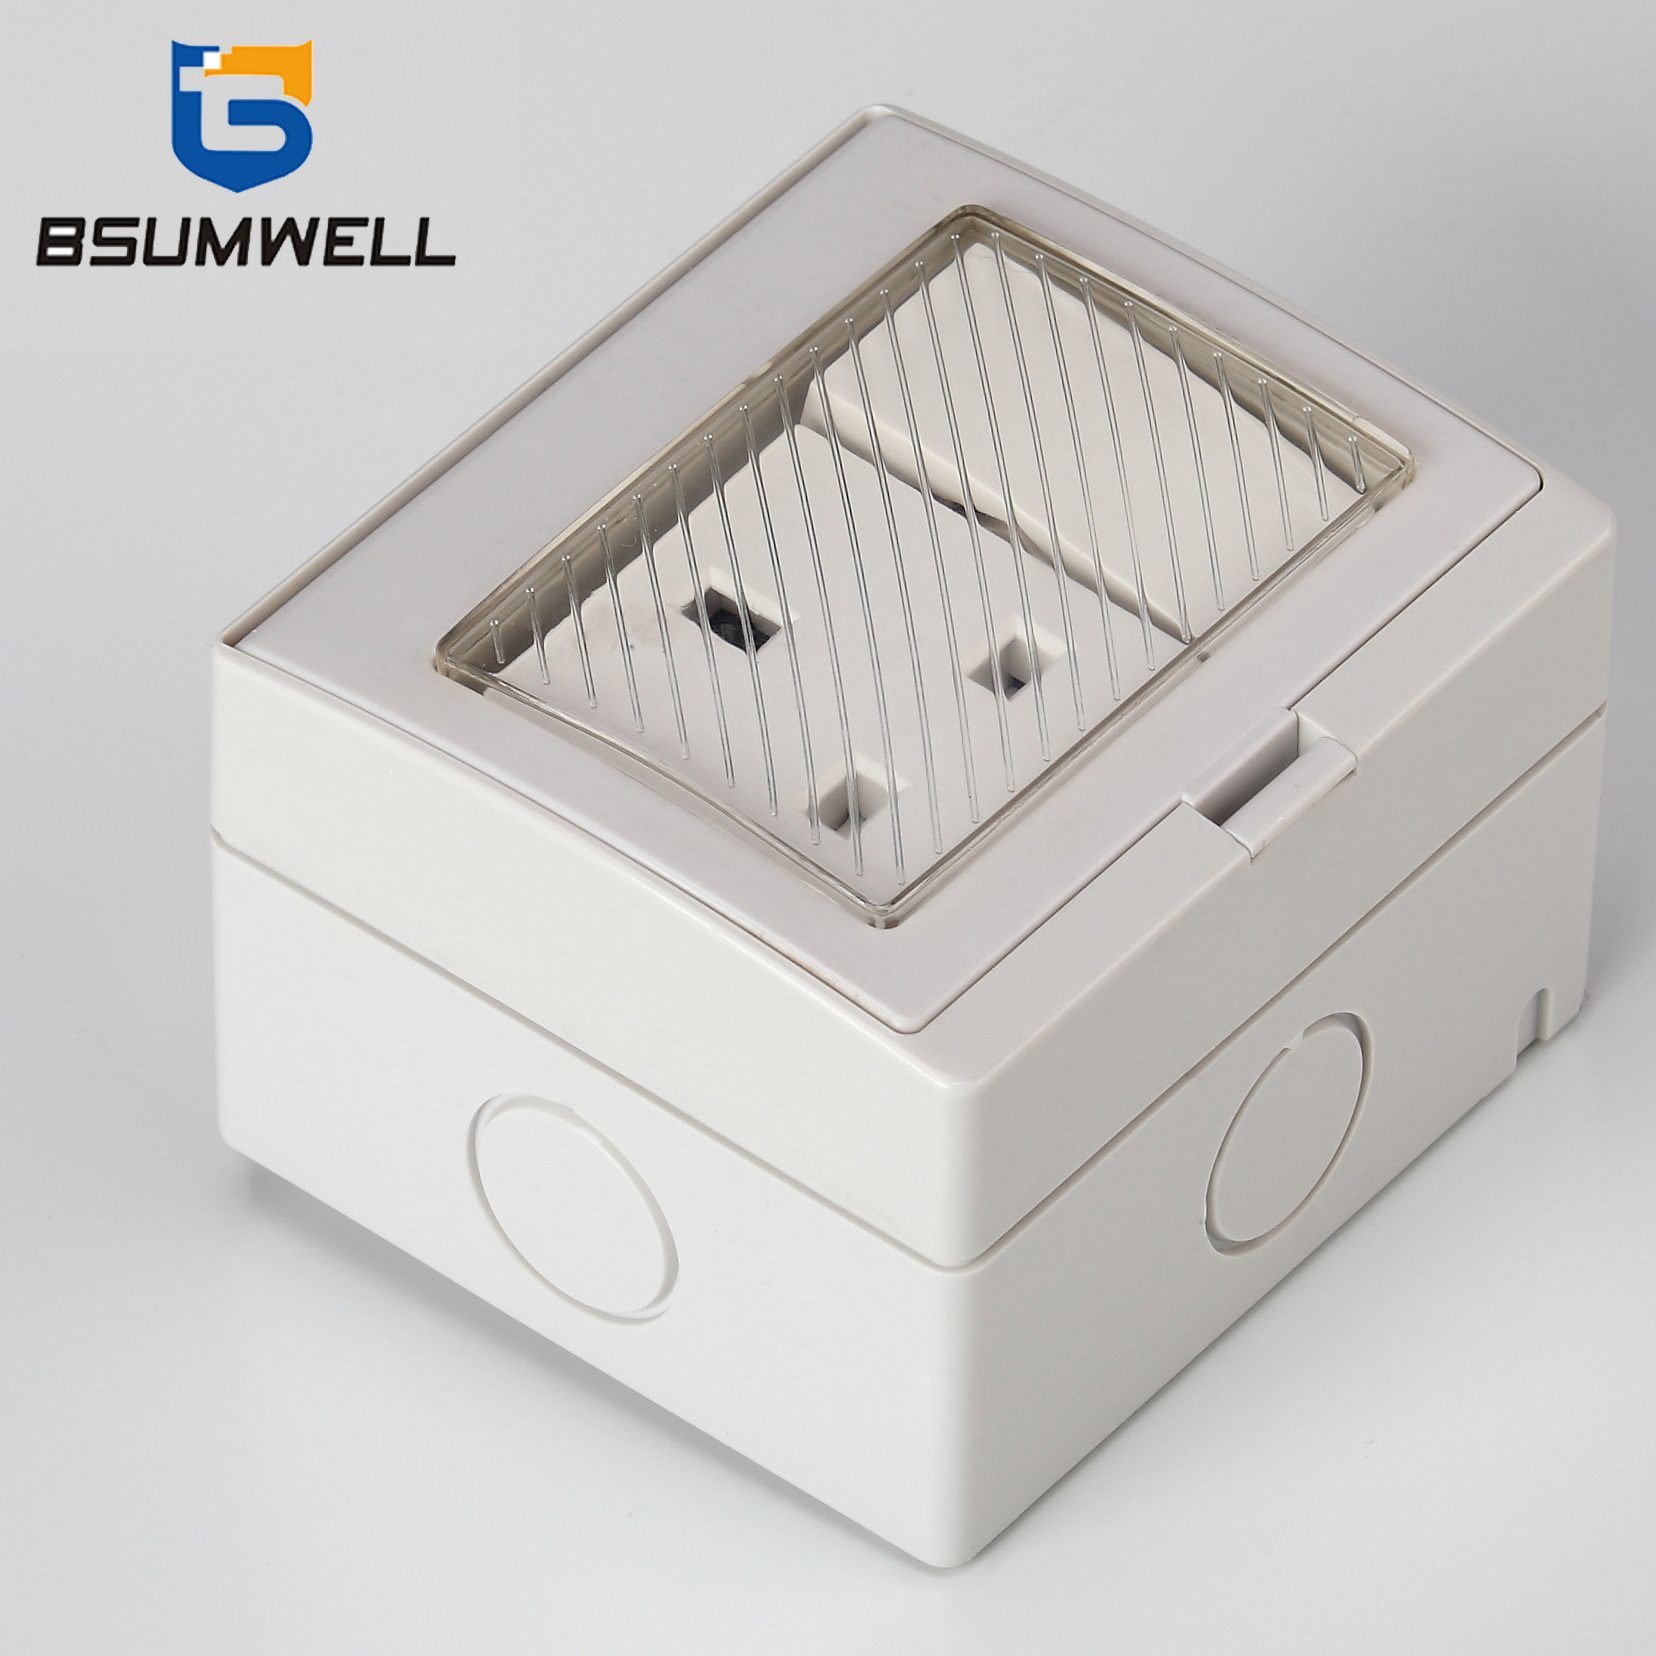 PS-SS 13A British type IP55 Waterproof 1 Gang Switch Socket 